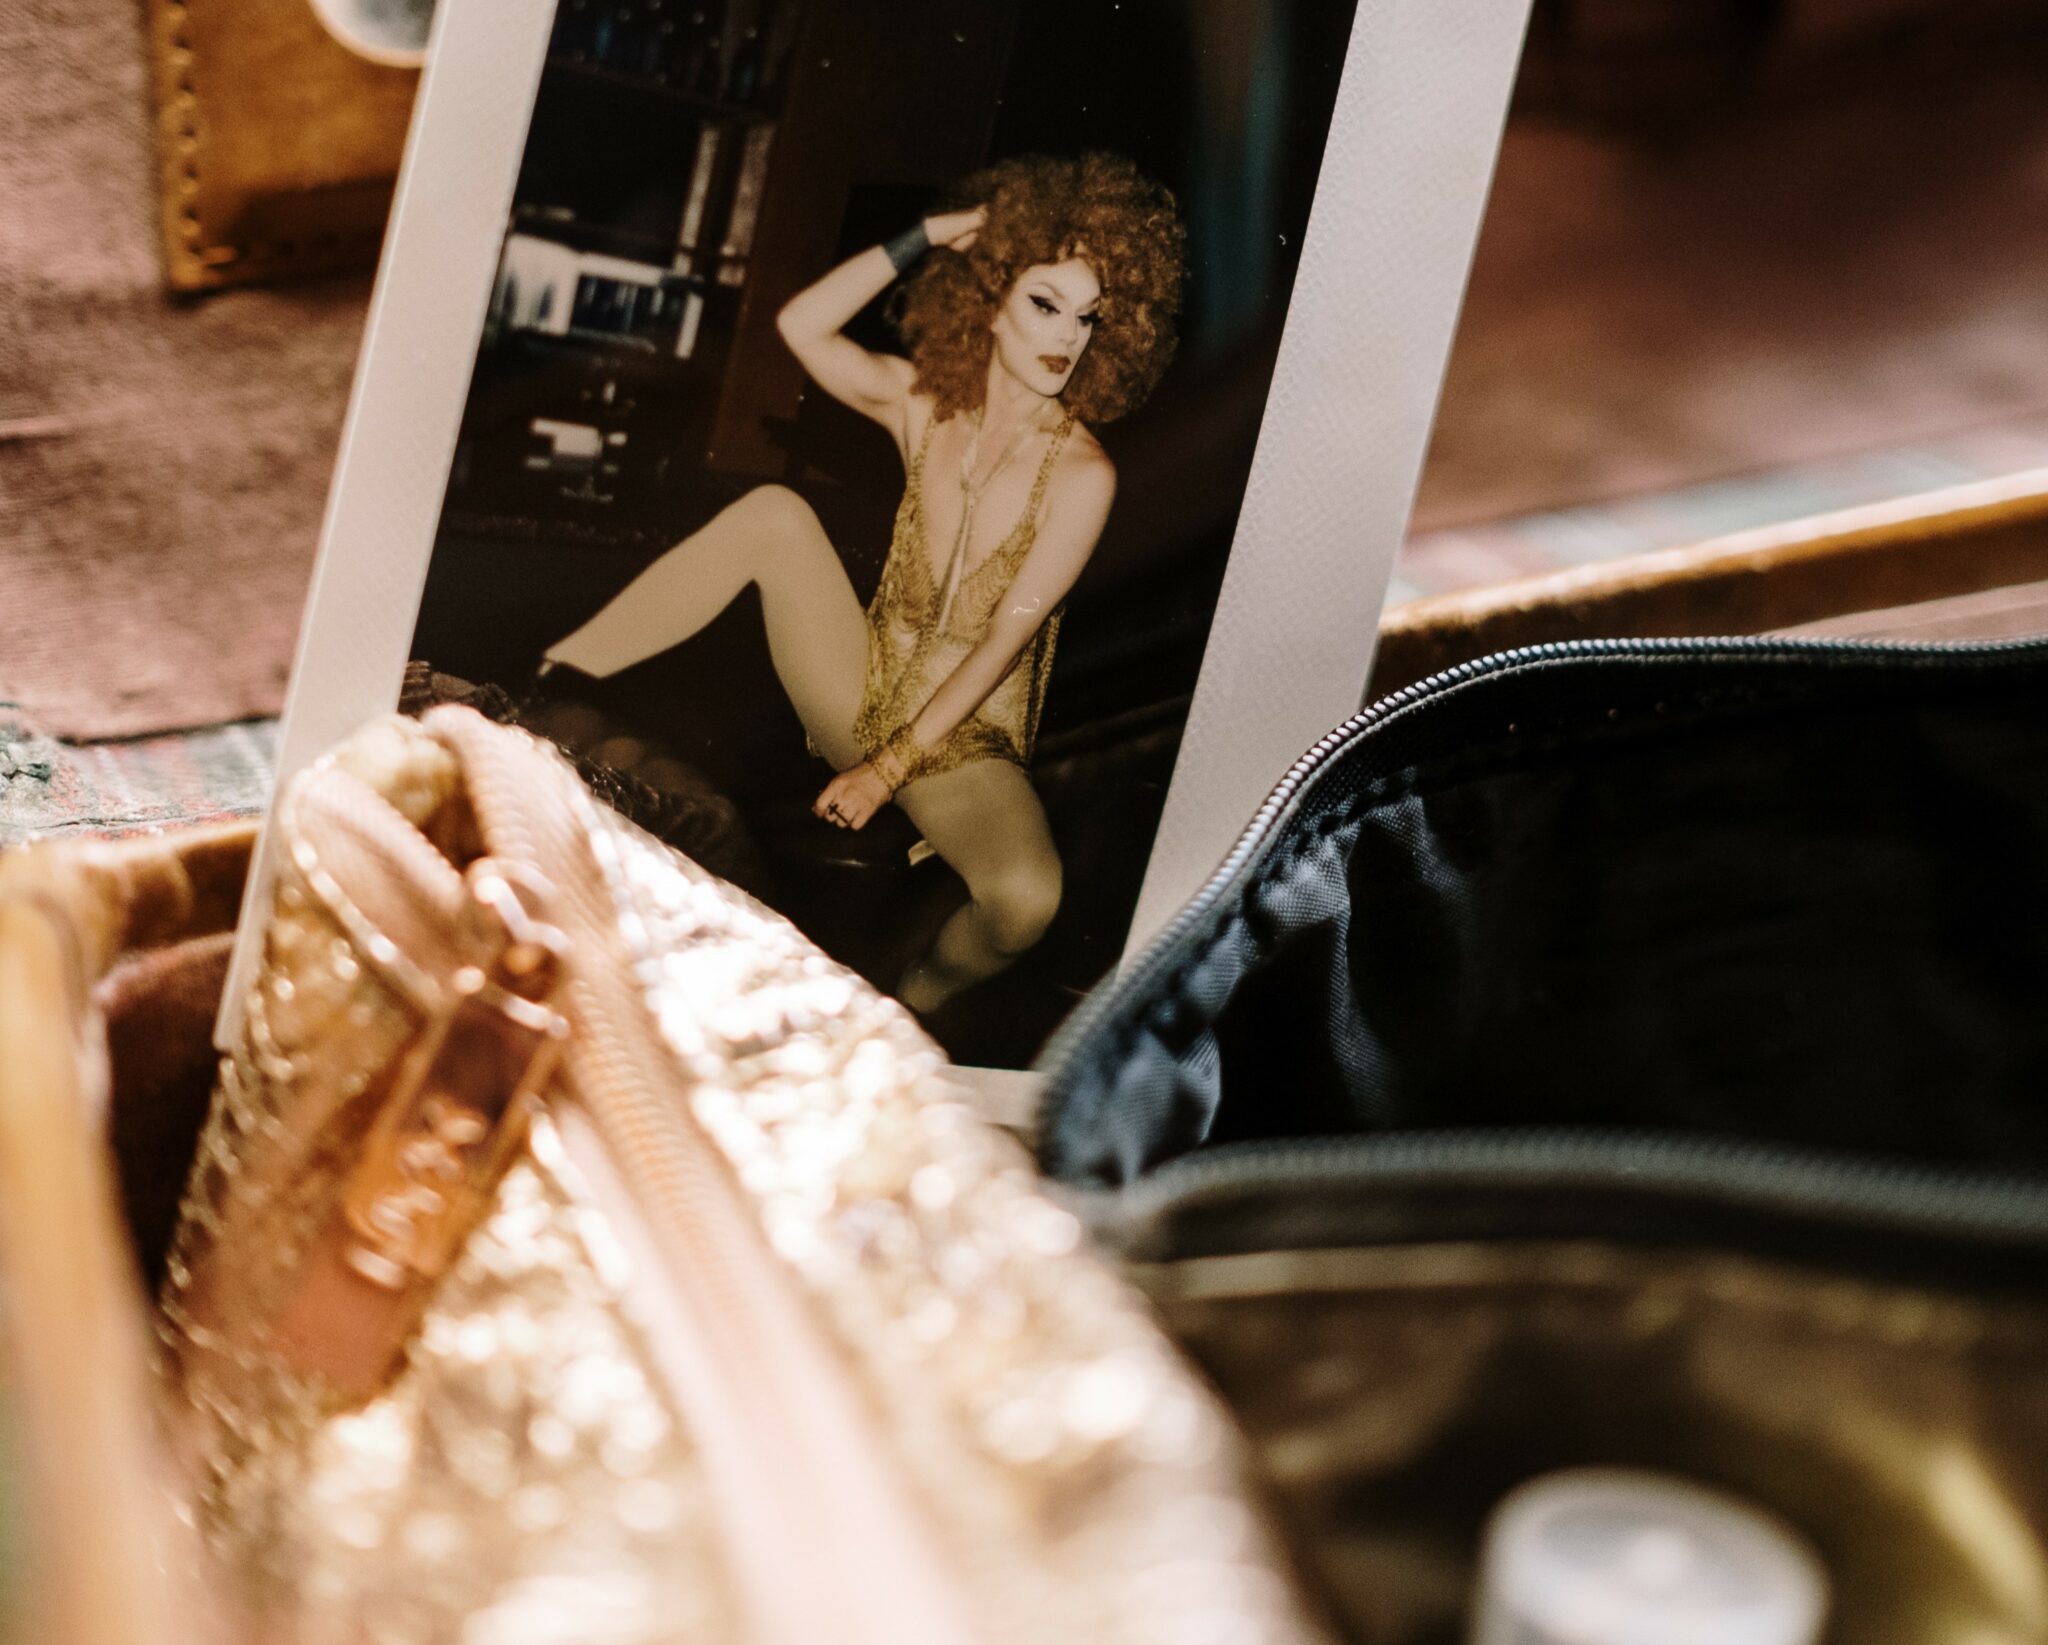 A polaroid image of a drag queen posing. The picture is resting behind makeup bags.